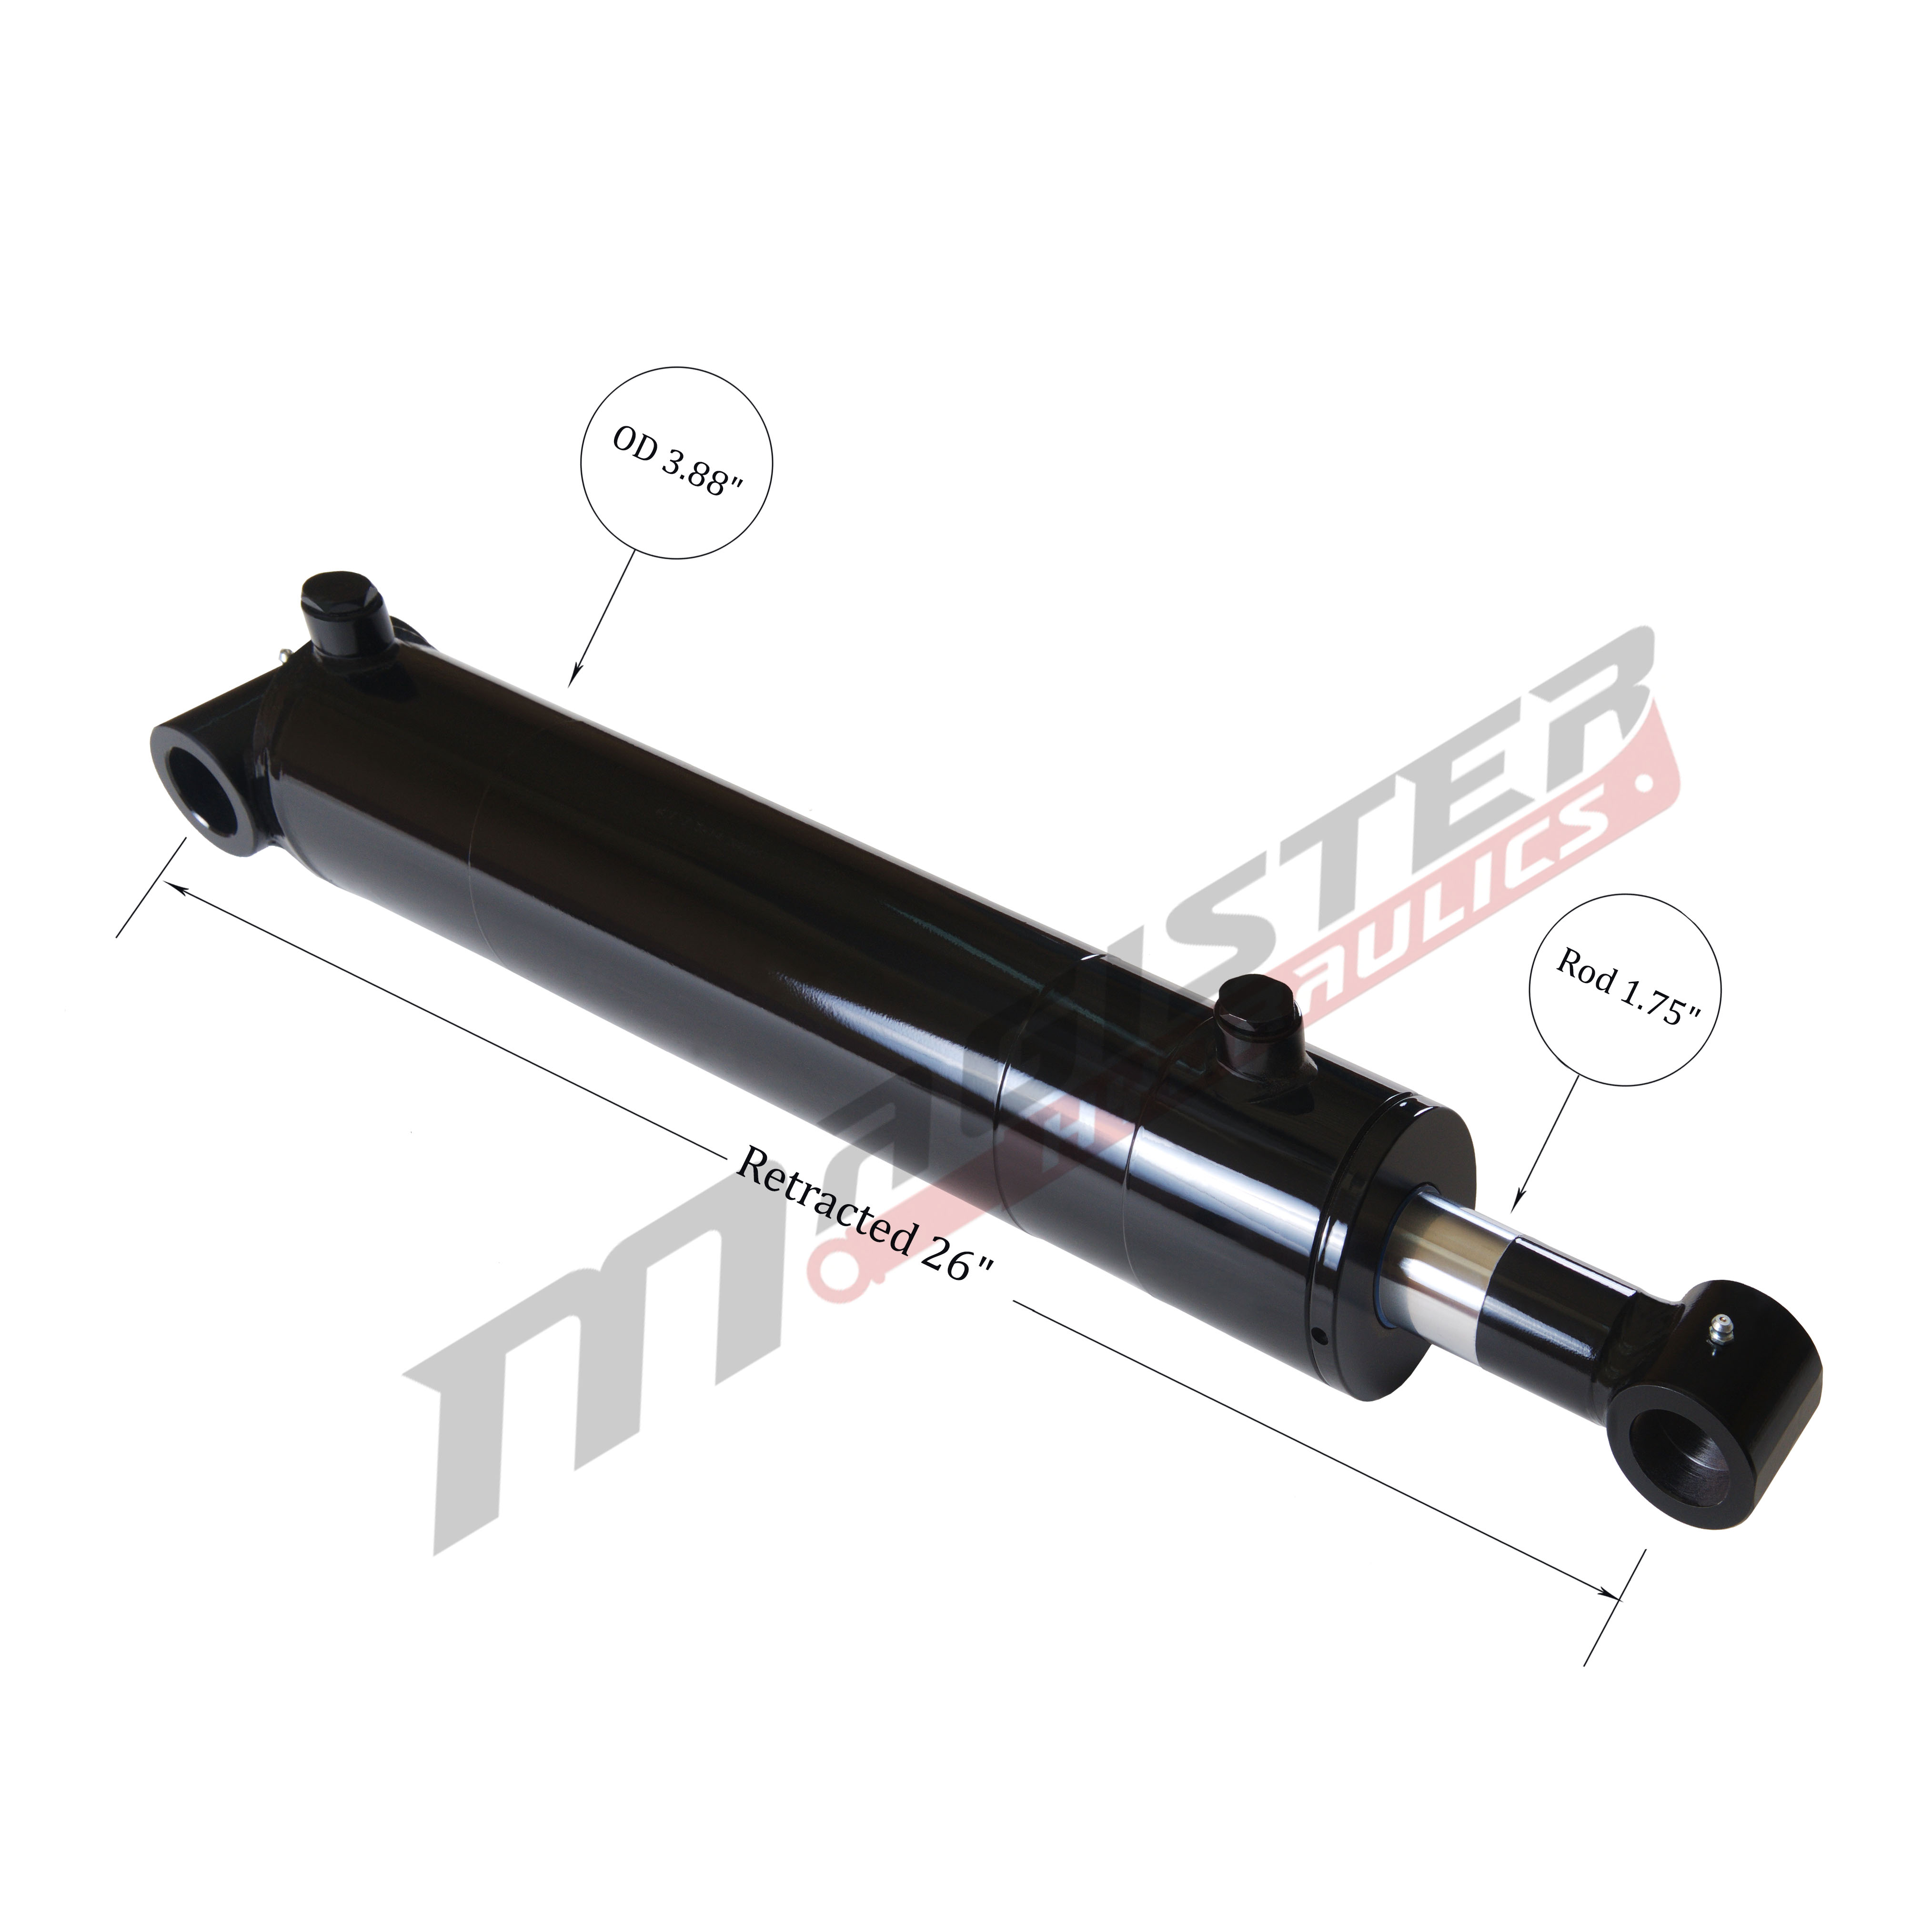 3.5 bore x 16 stroke hydraulic cylinder, welded cross tube double acting cylinder | Magister Hydraulics